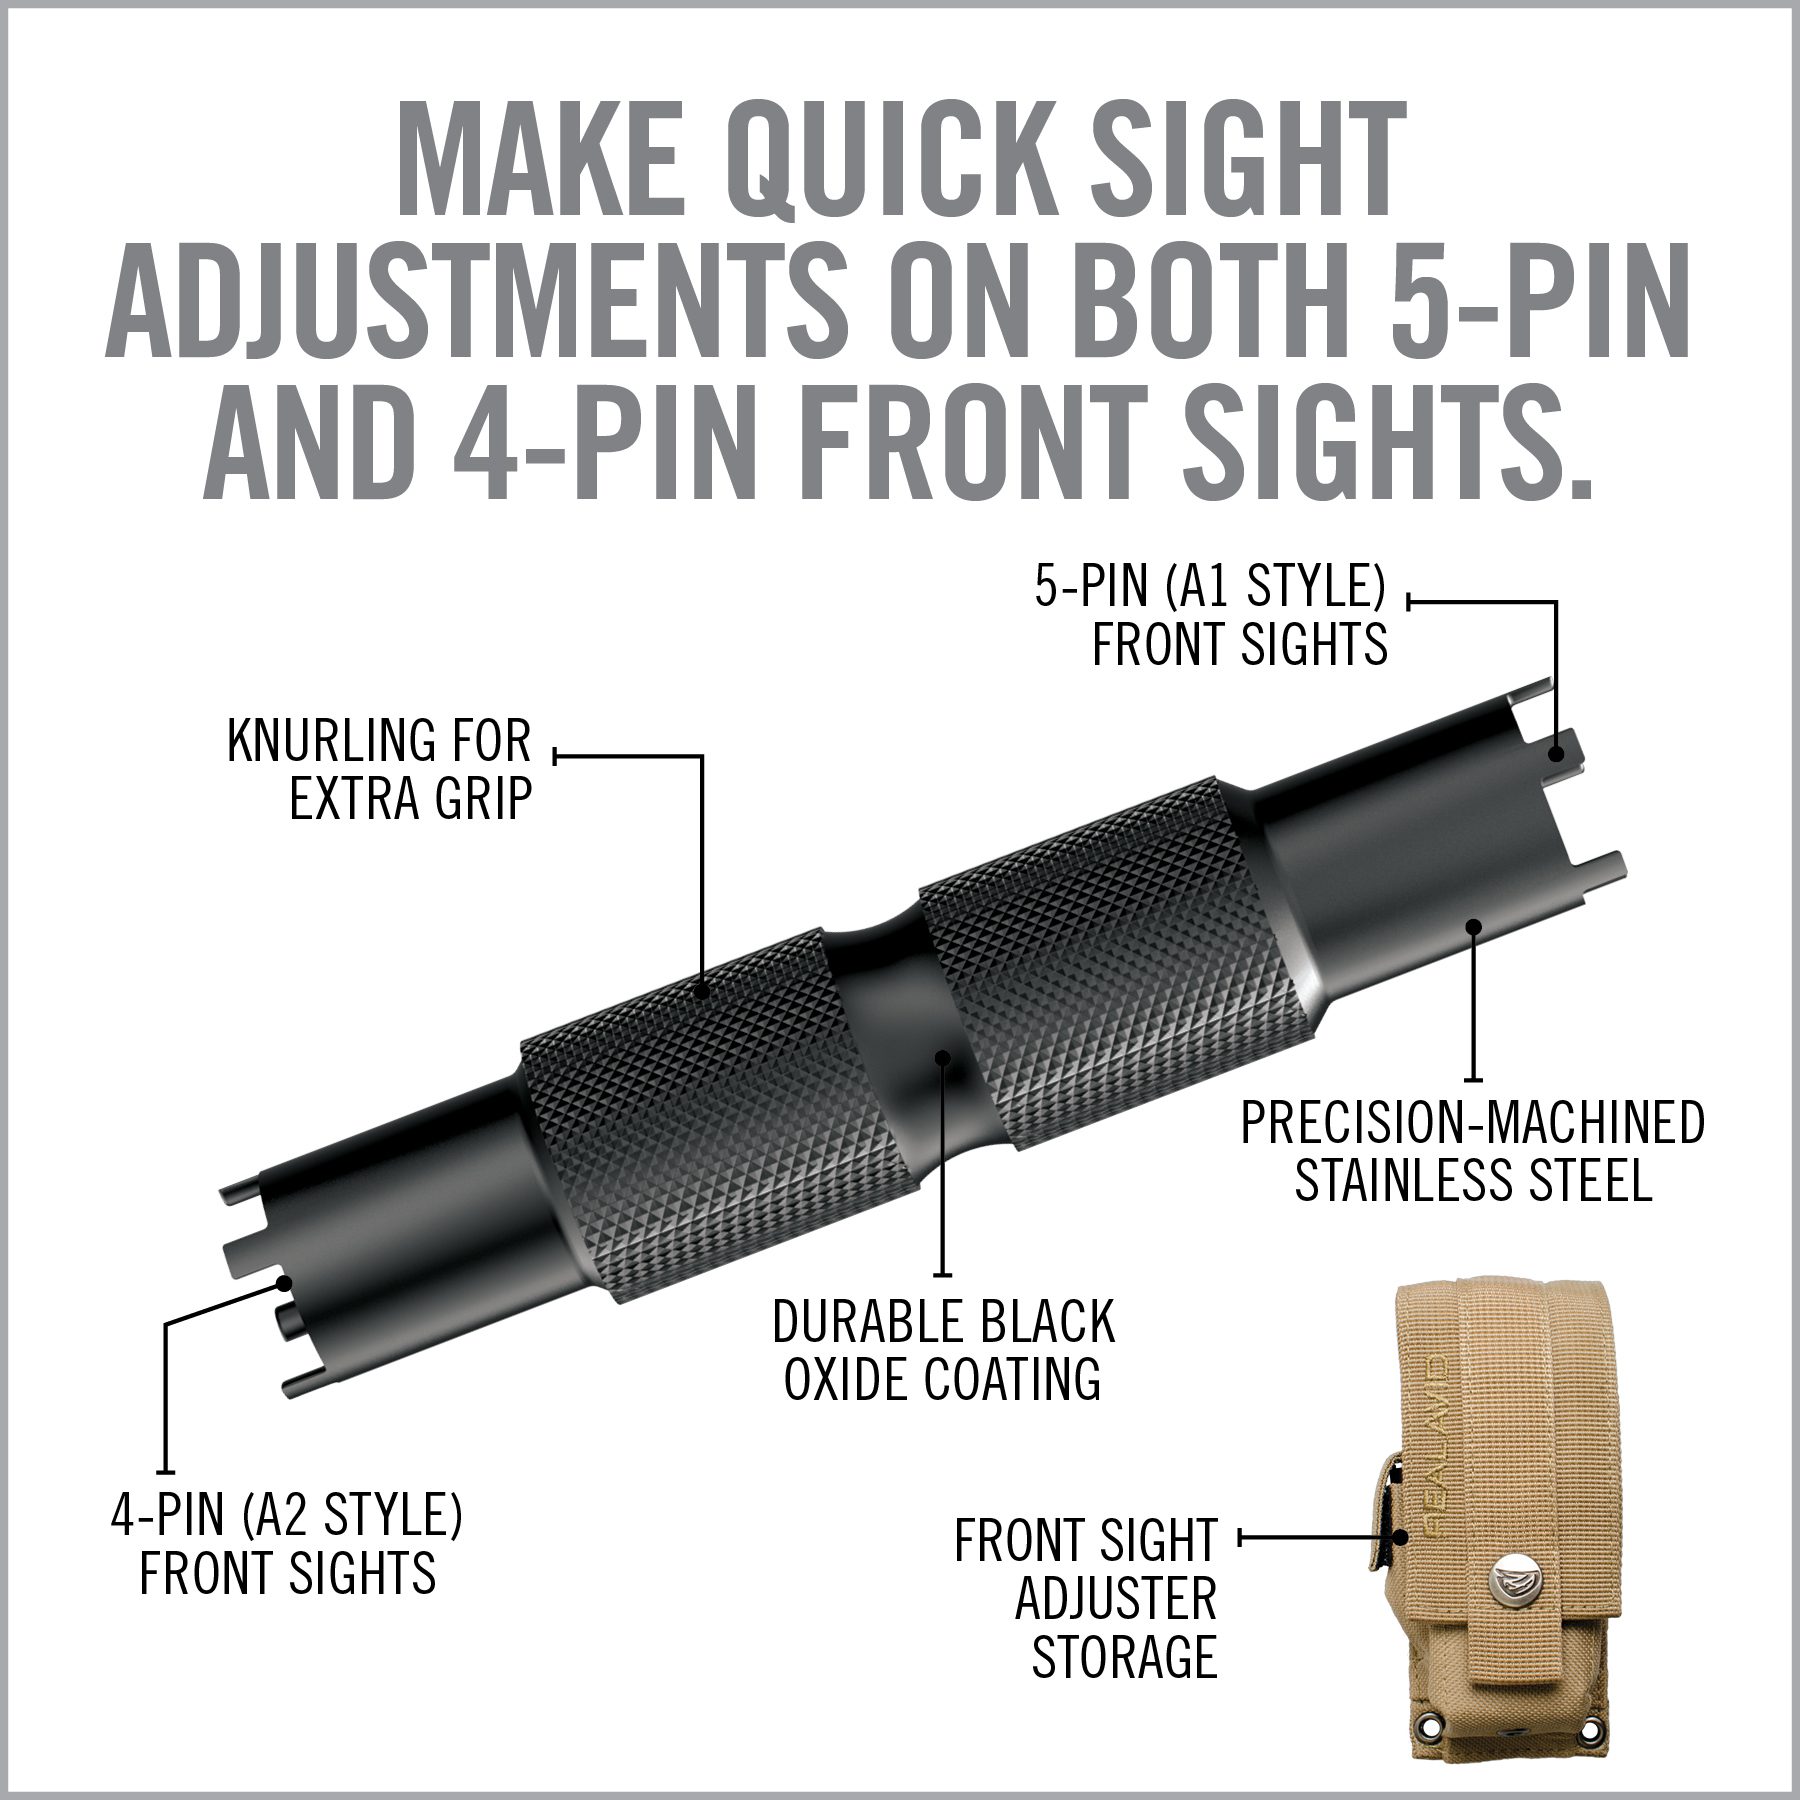 the instructions for how to make quick sight adjustments on both 5 - pin and 4 - pin front sights